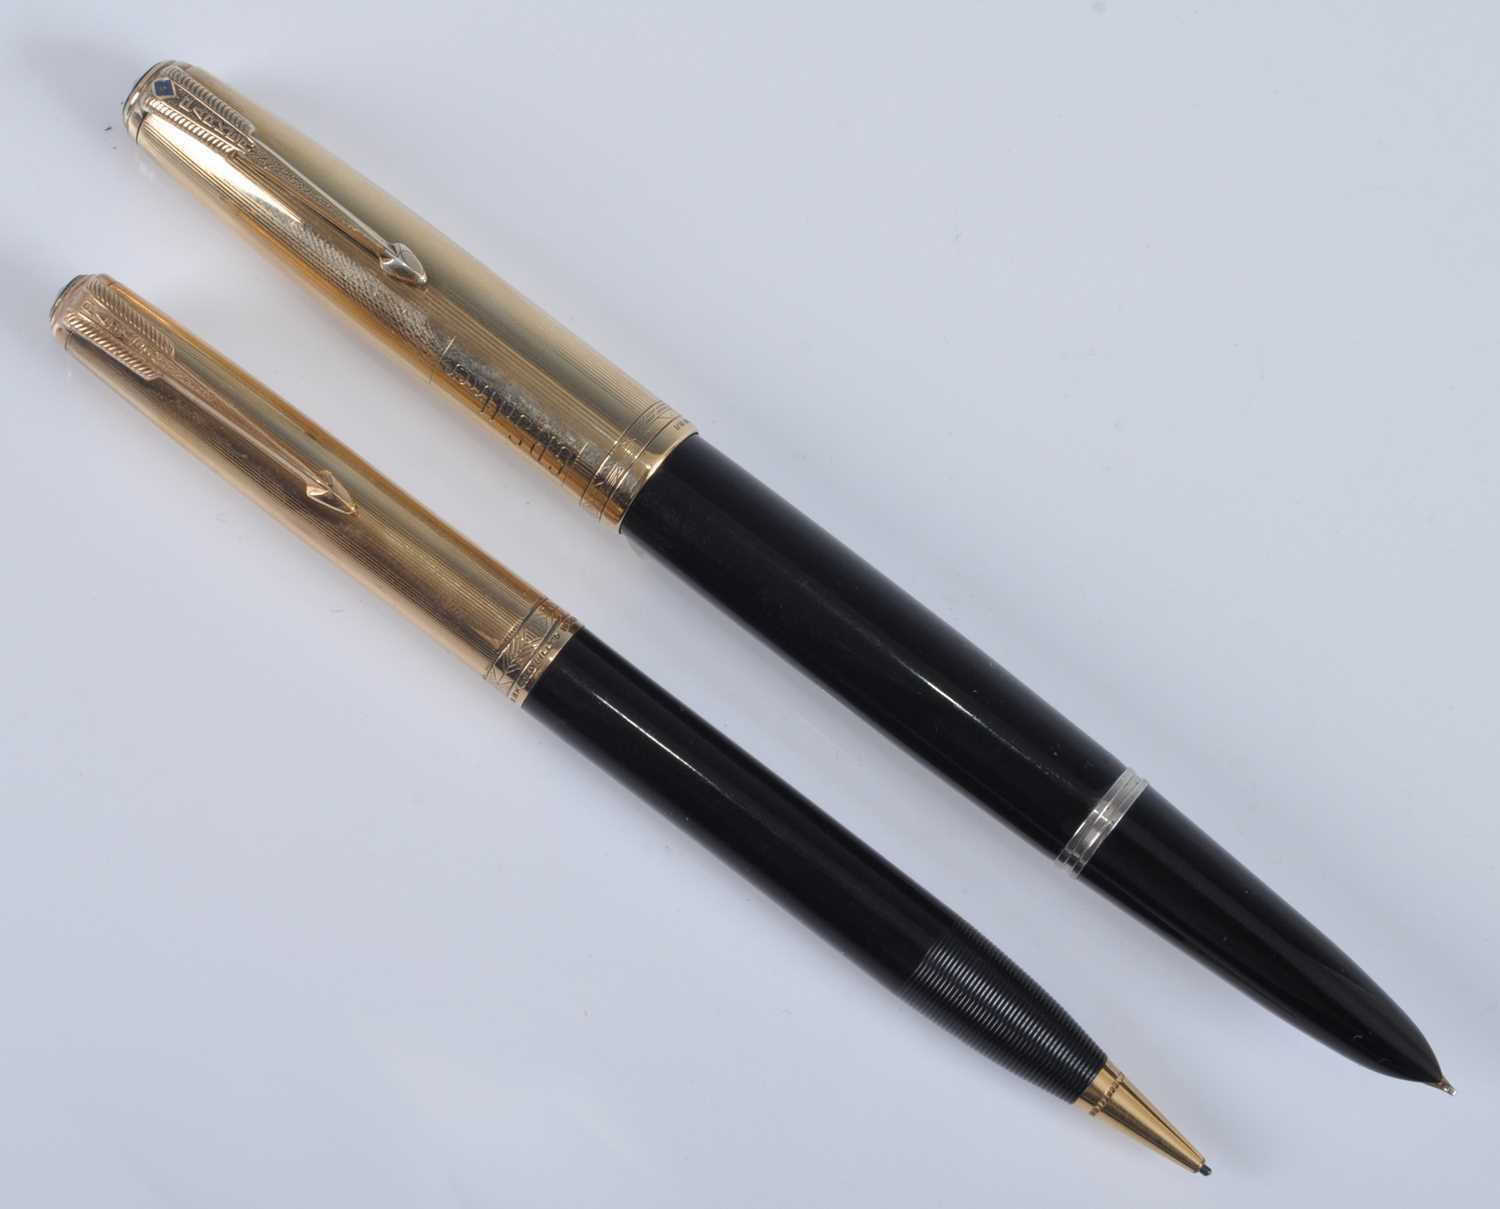 A Parker 51 fountain pen and pencil set, in black with gold trim, the pen barrel engraved PARKER "